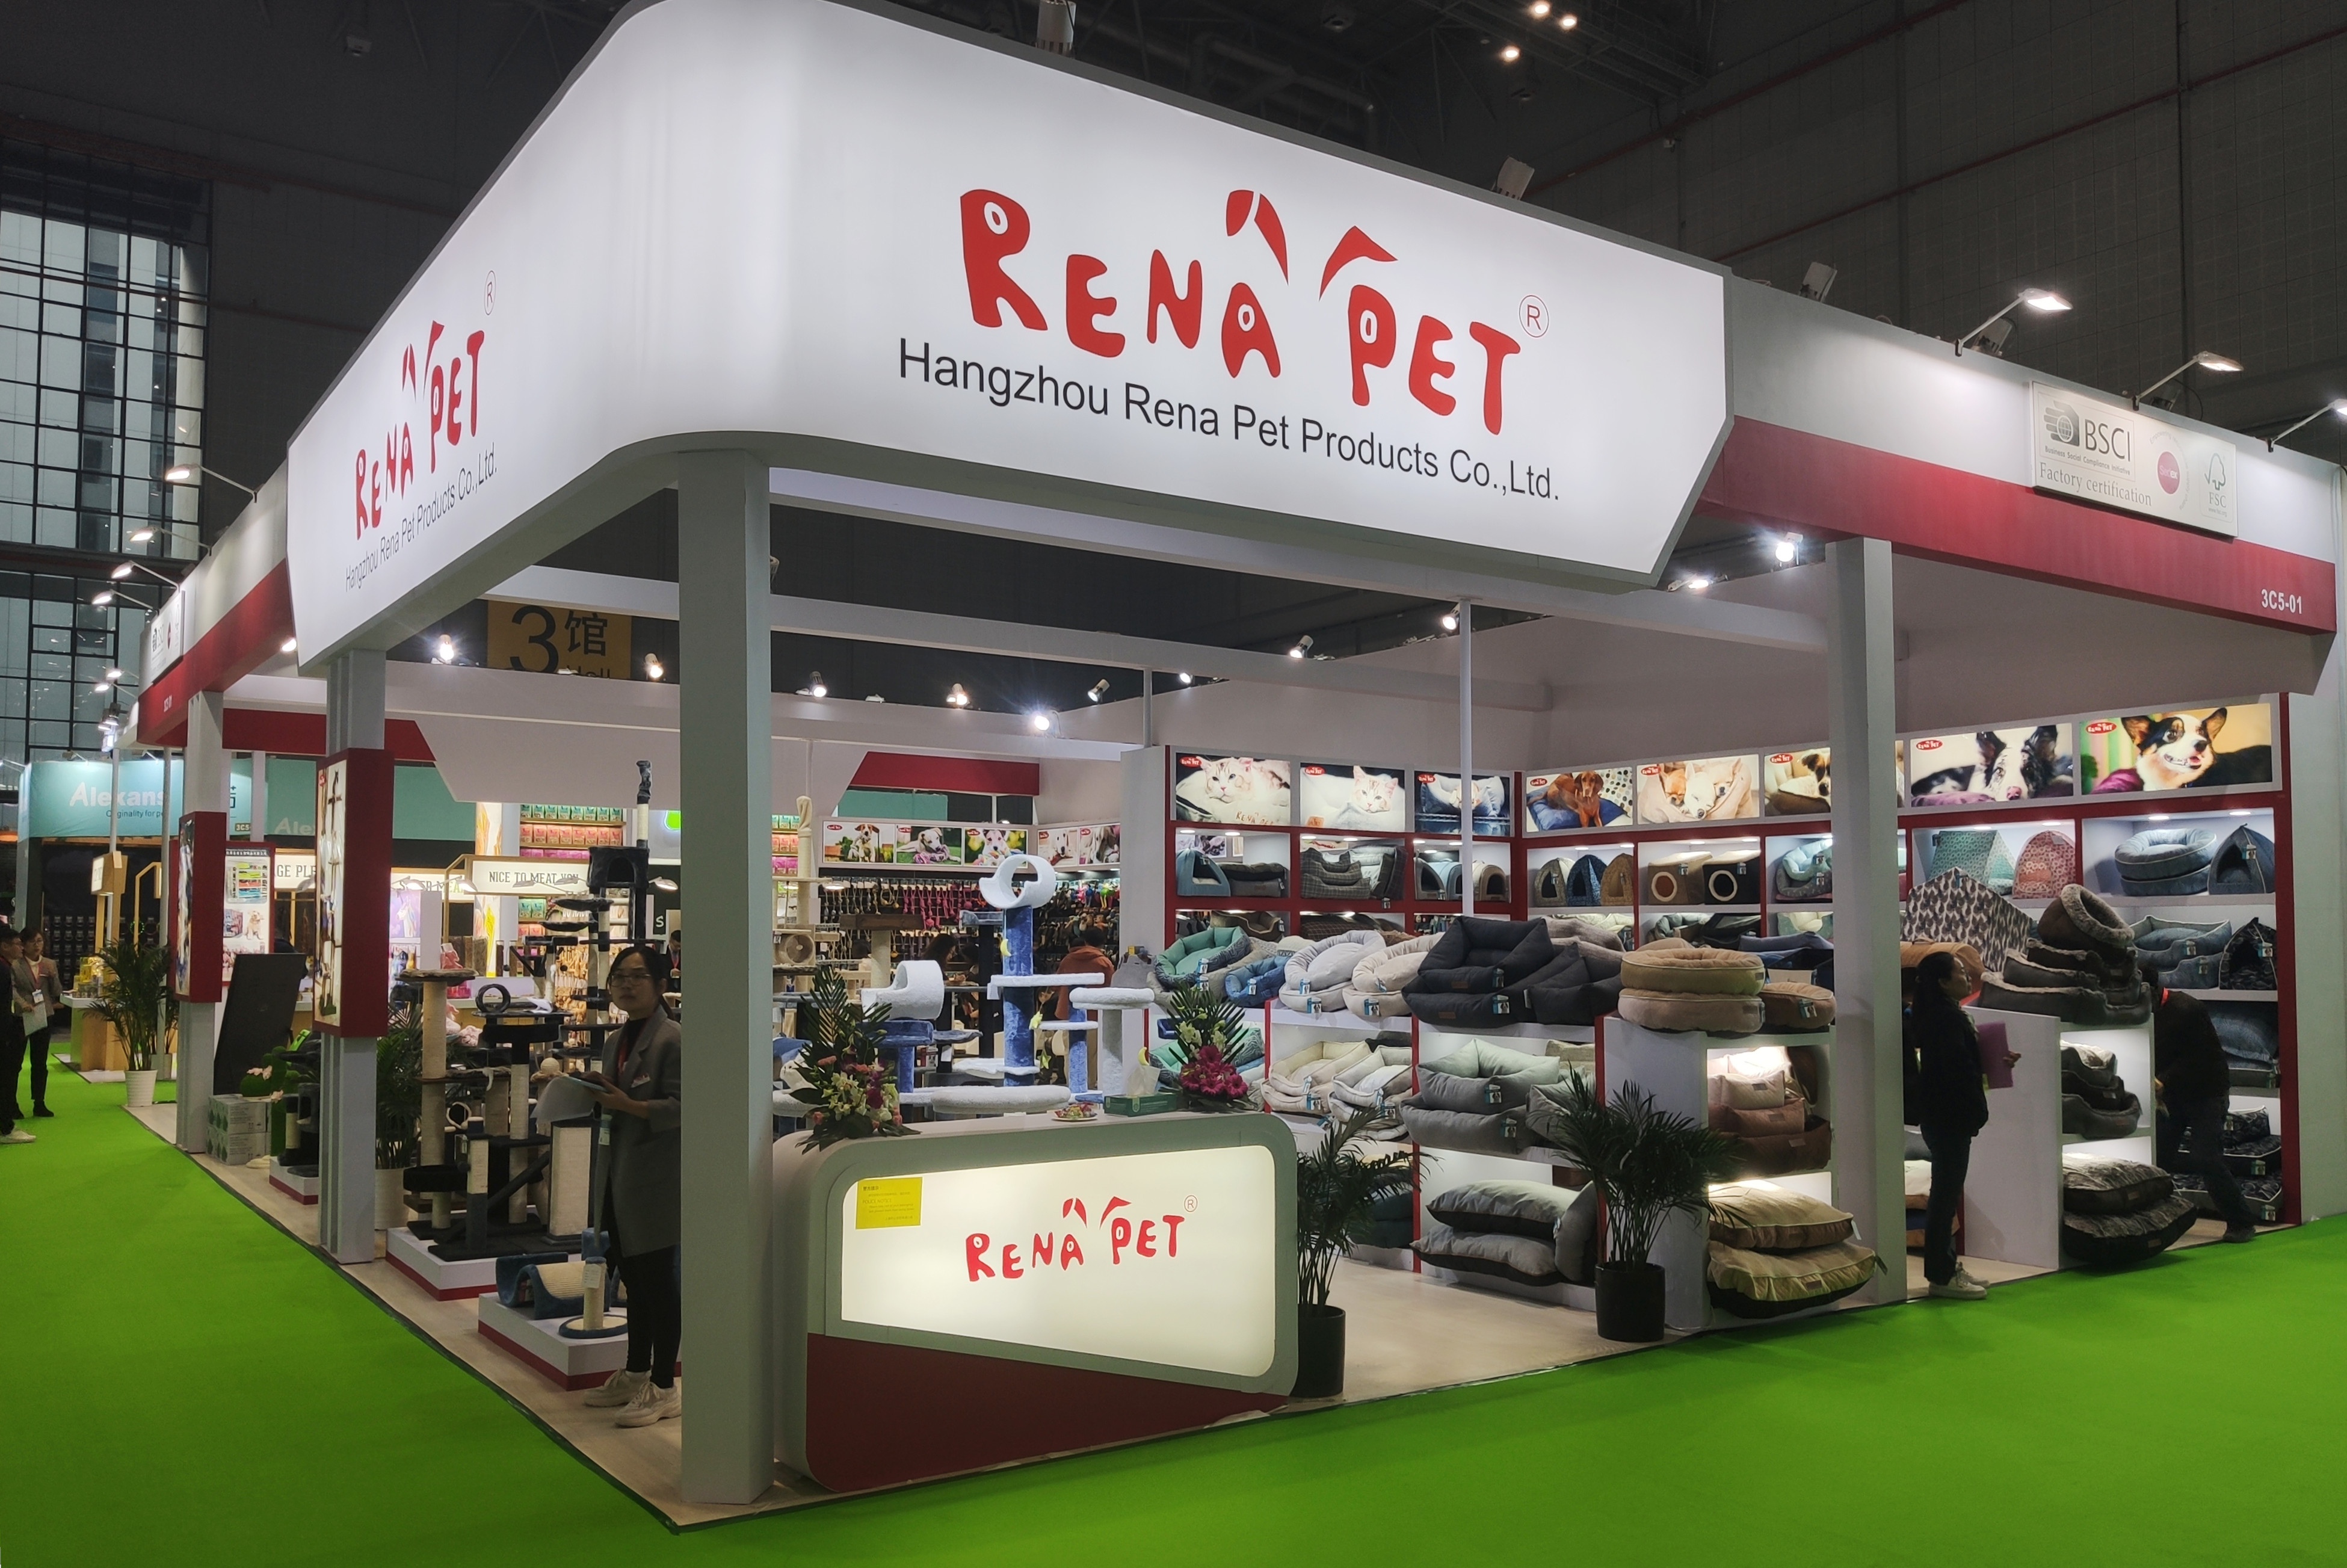 Rena Pet Would Attend to CIPS in November 2022